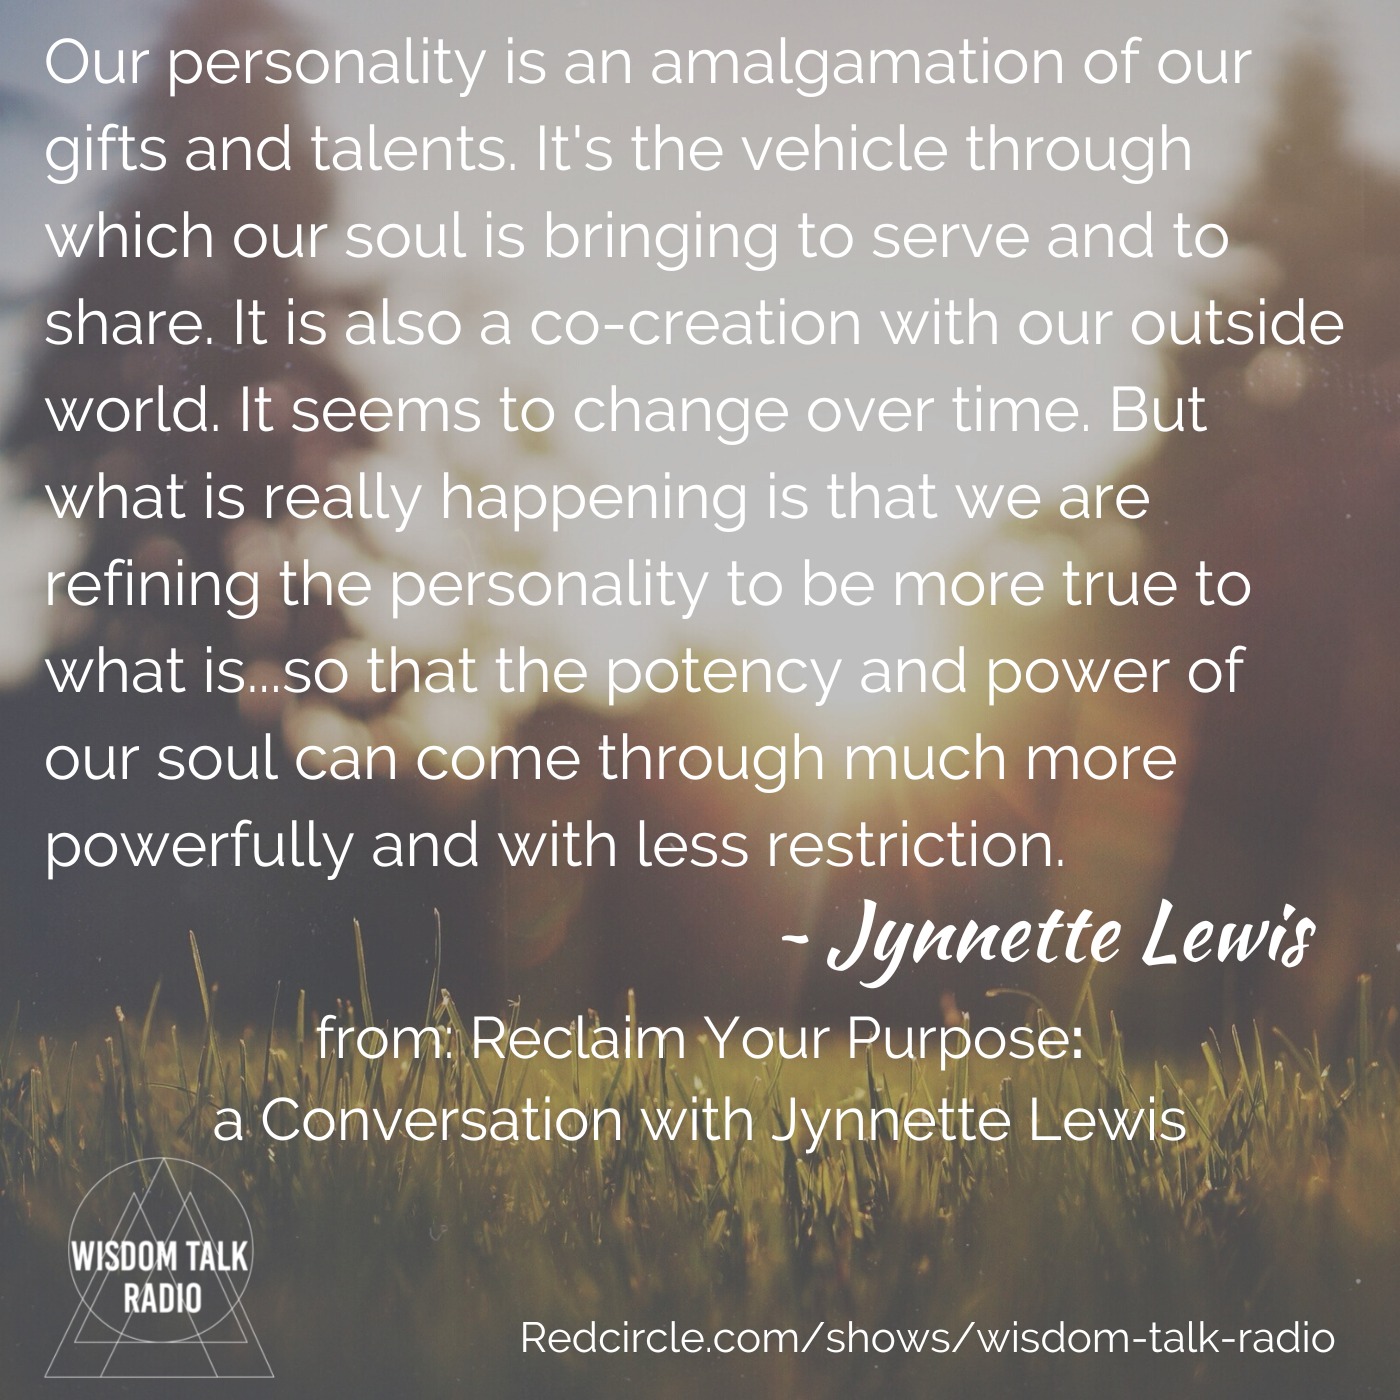 Reclaim Your Purpose: a conversation with Jynnette Lewis